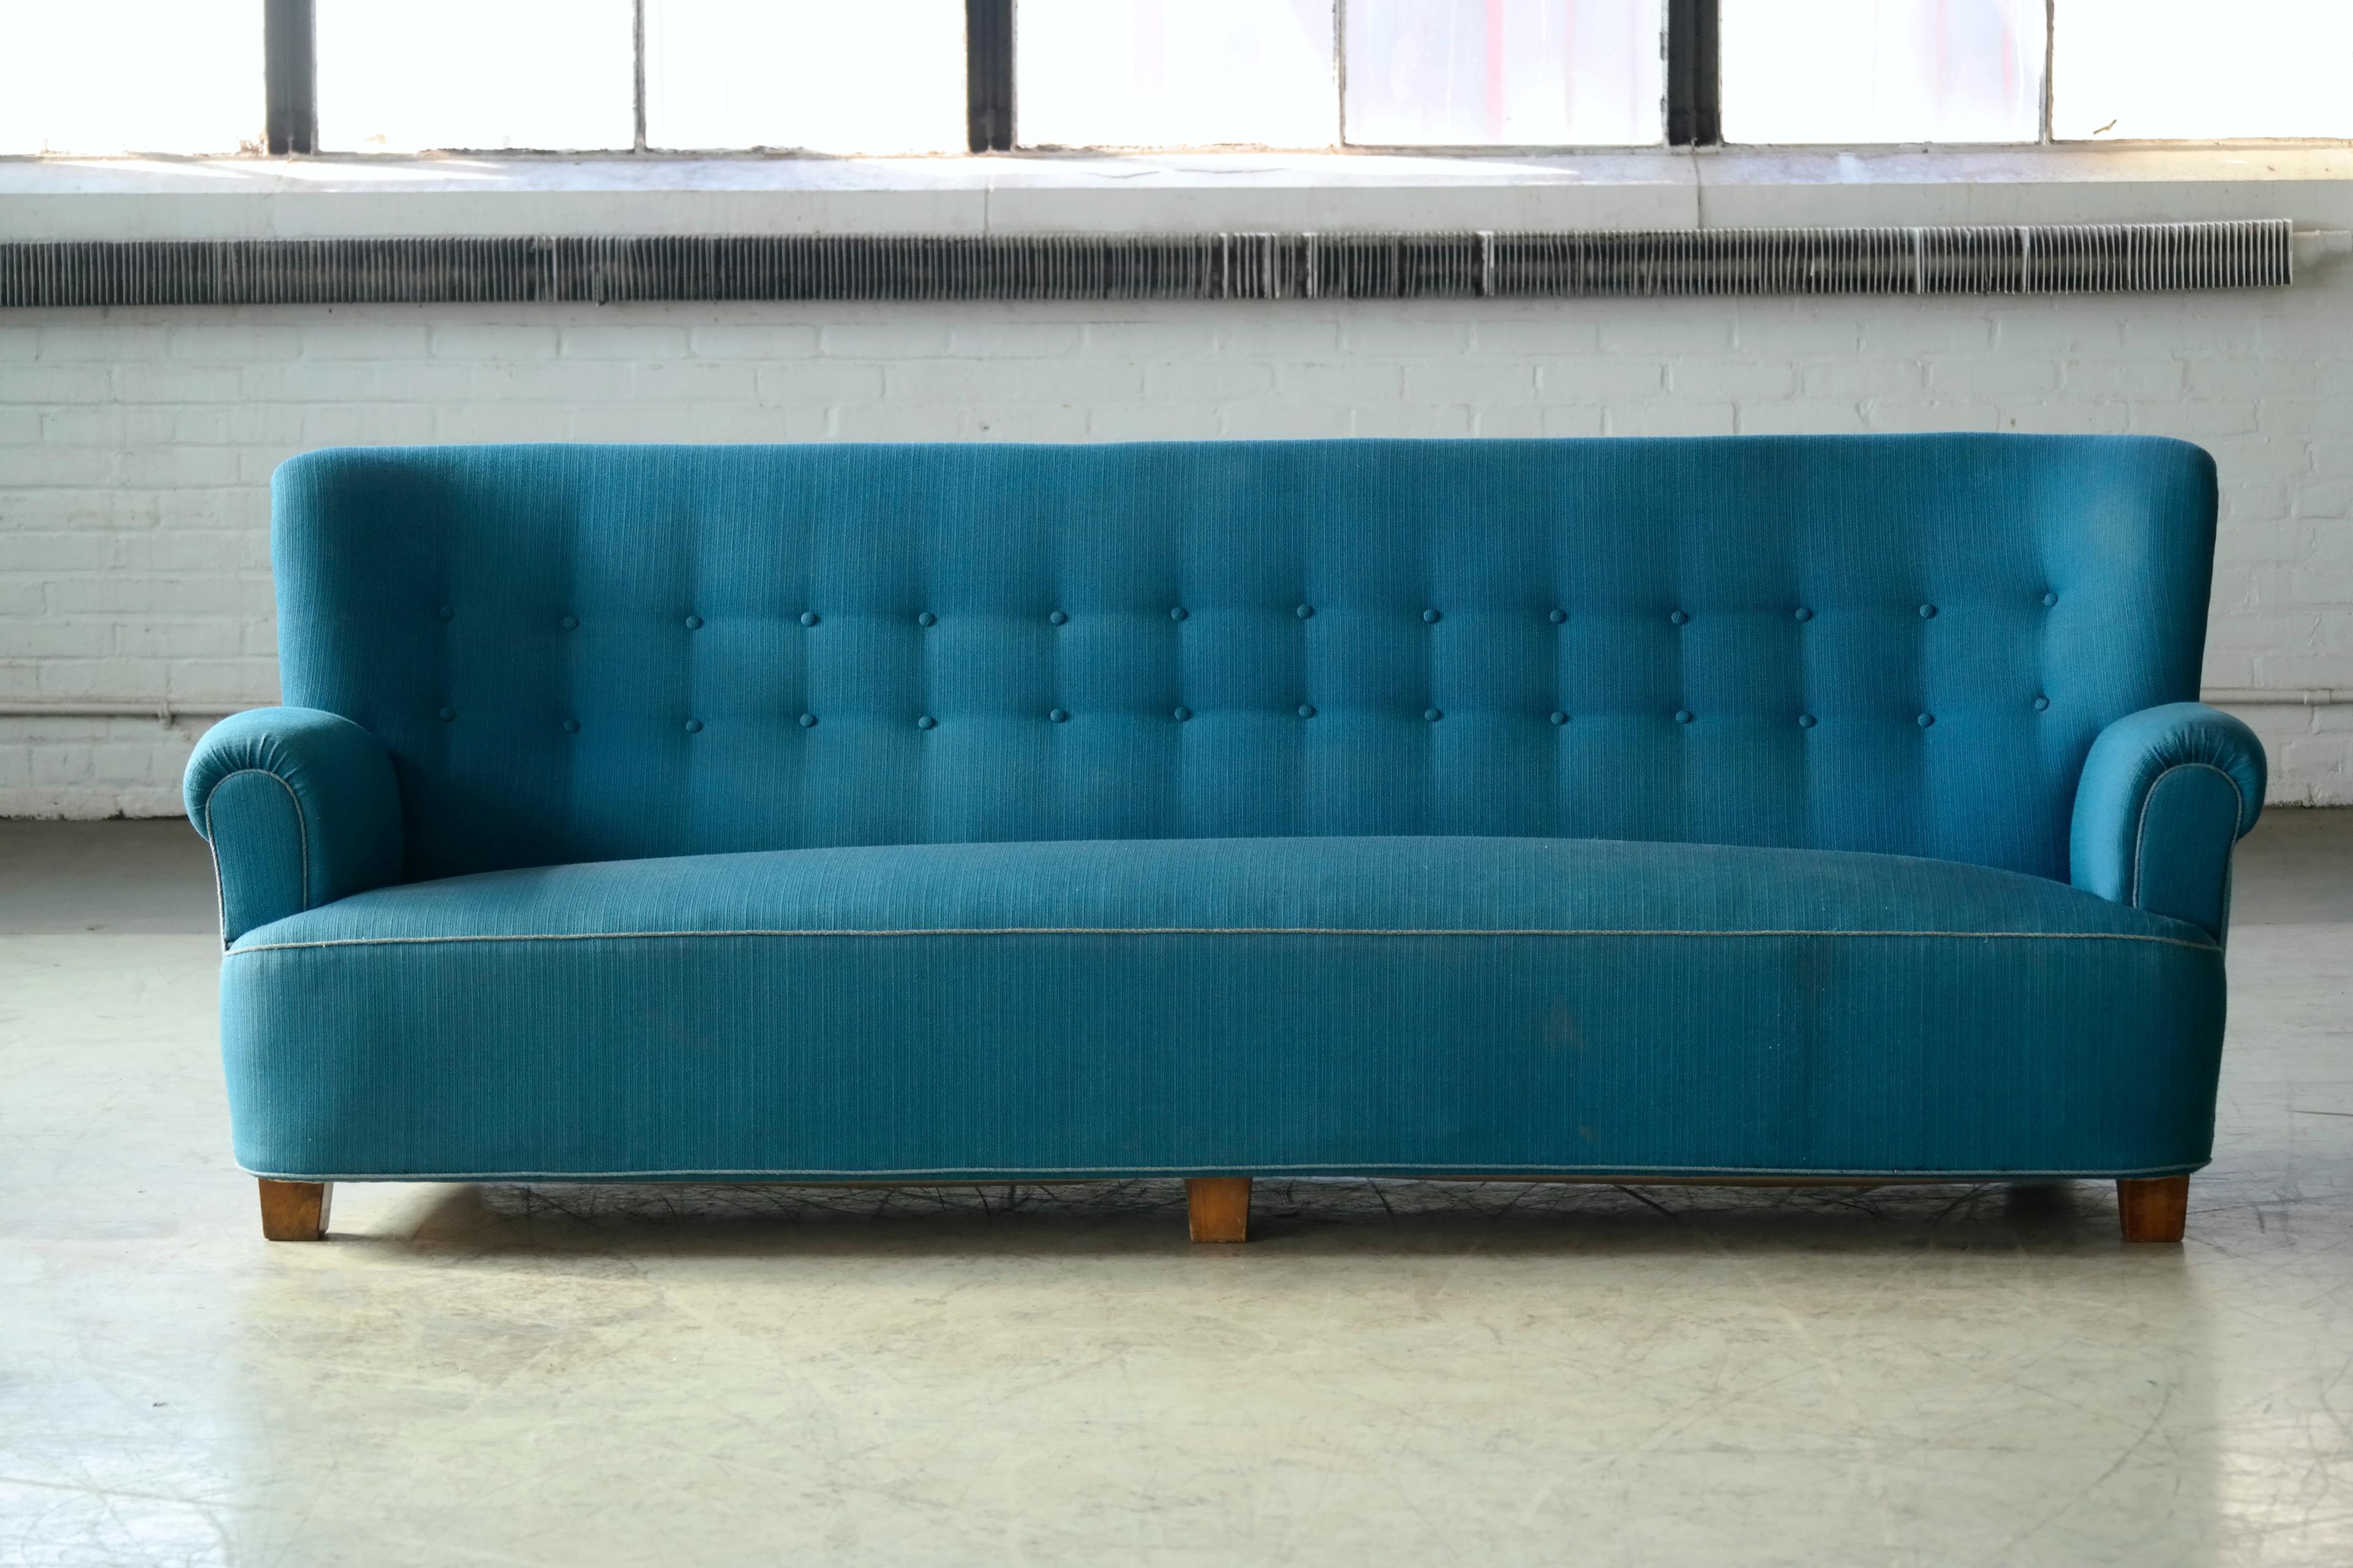 Impressive Danish four-seat sofa from the 1940s. Similar stance and proportions and seen in Viggo Boesens's voluptious designs but without his signature rounded armrests. These armrests combined with the solid square legs are more characteristic of